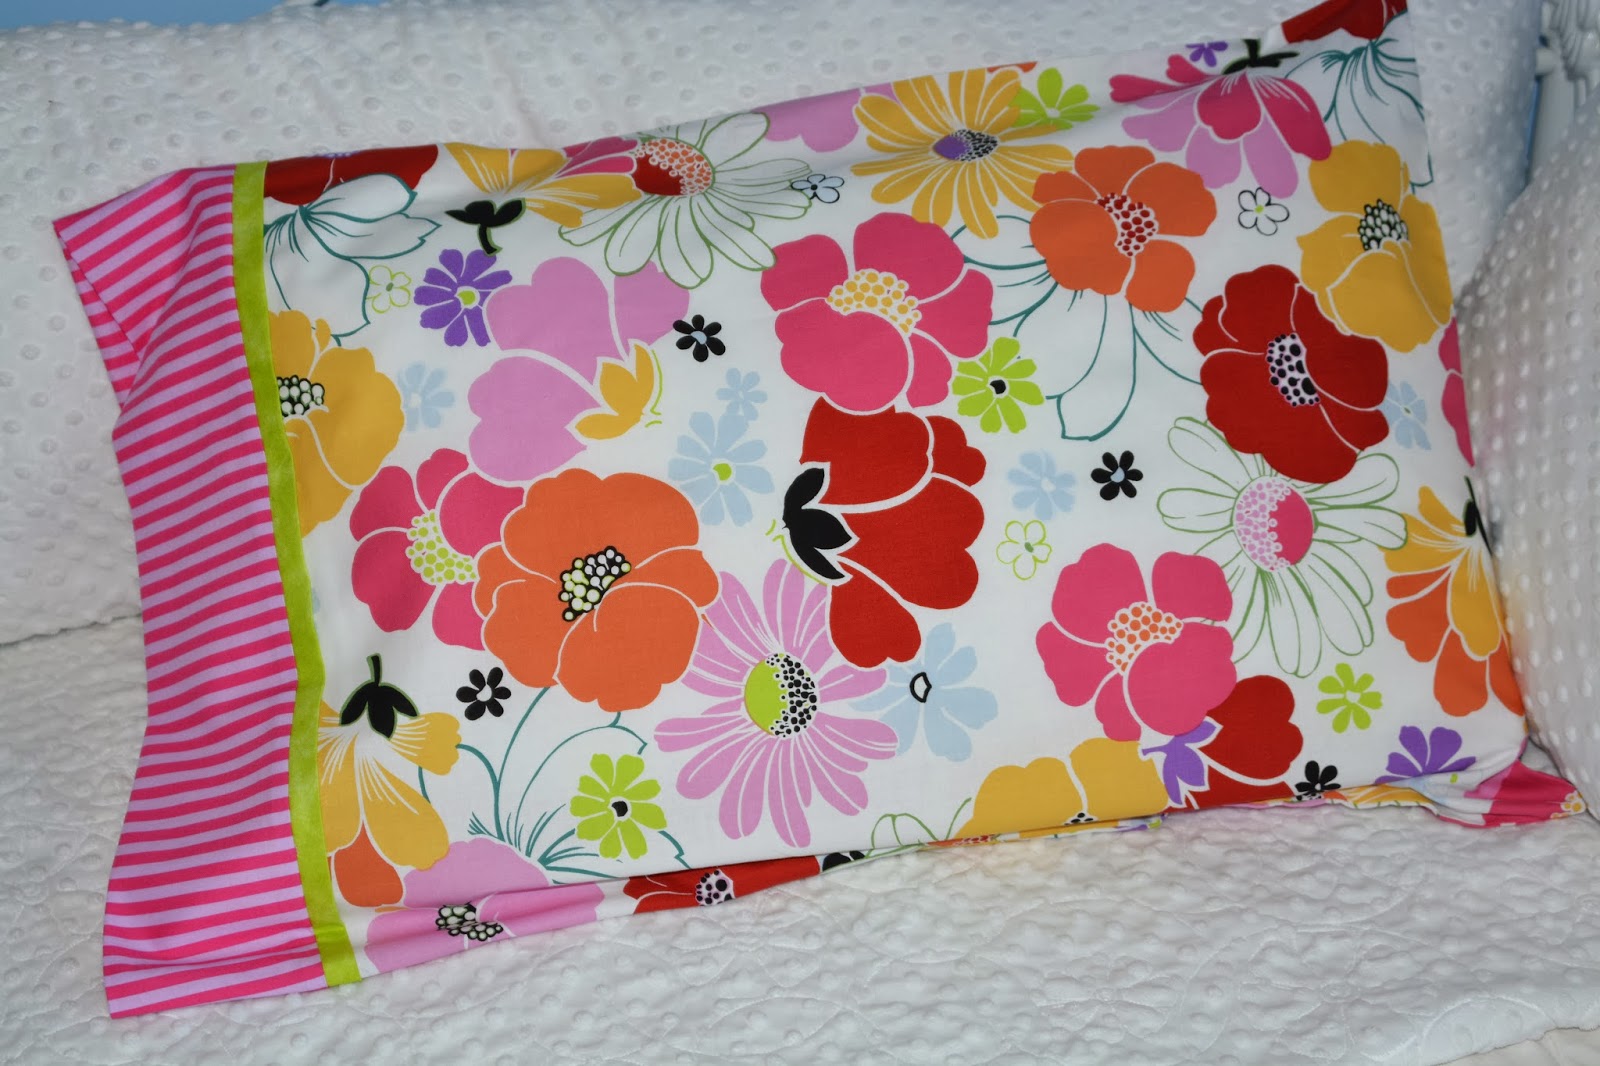 ann-arbor-sewing-center-blog-free-pillow-case-pattern-and-video-tutorial